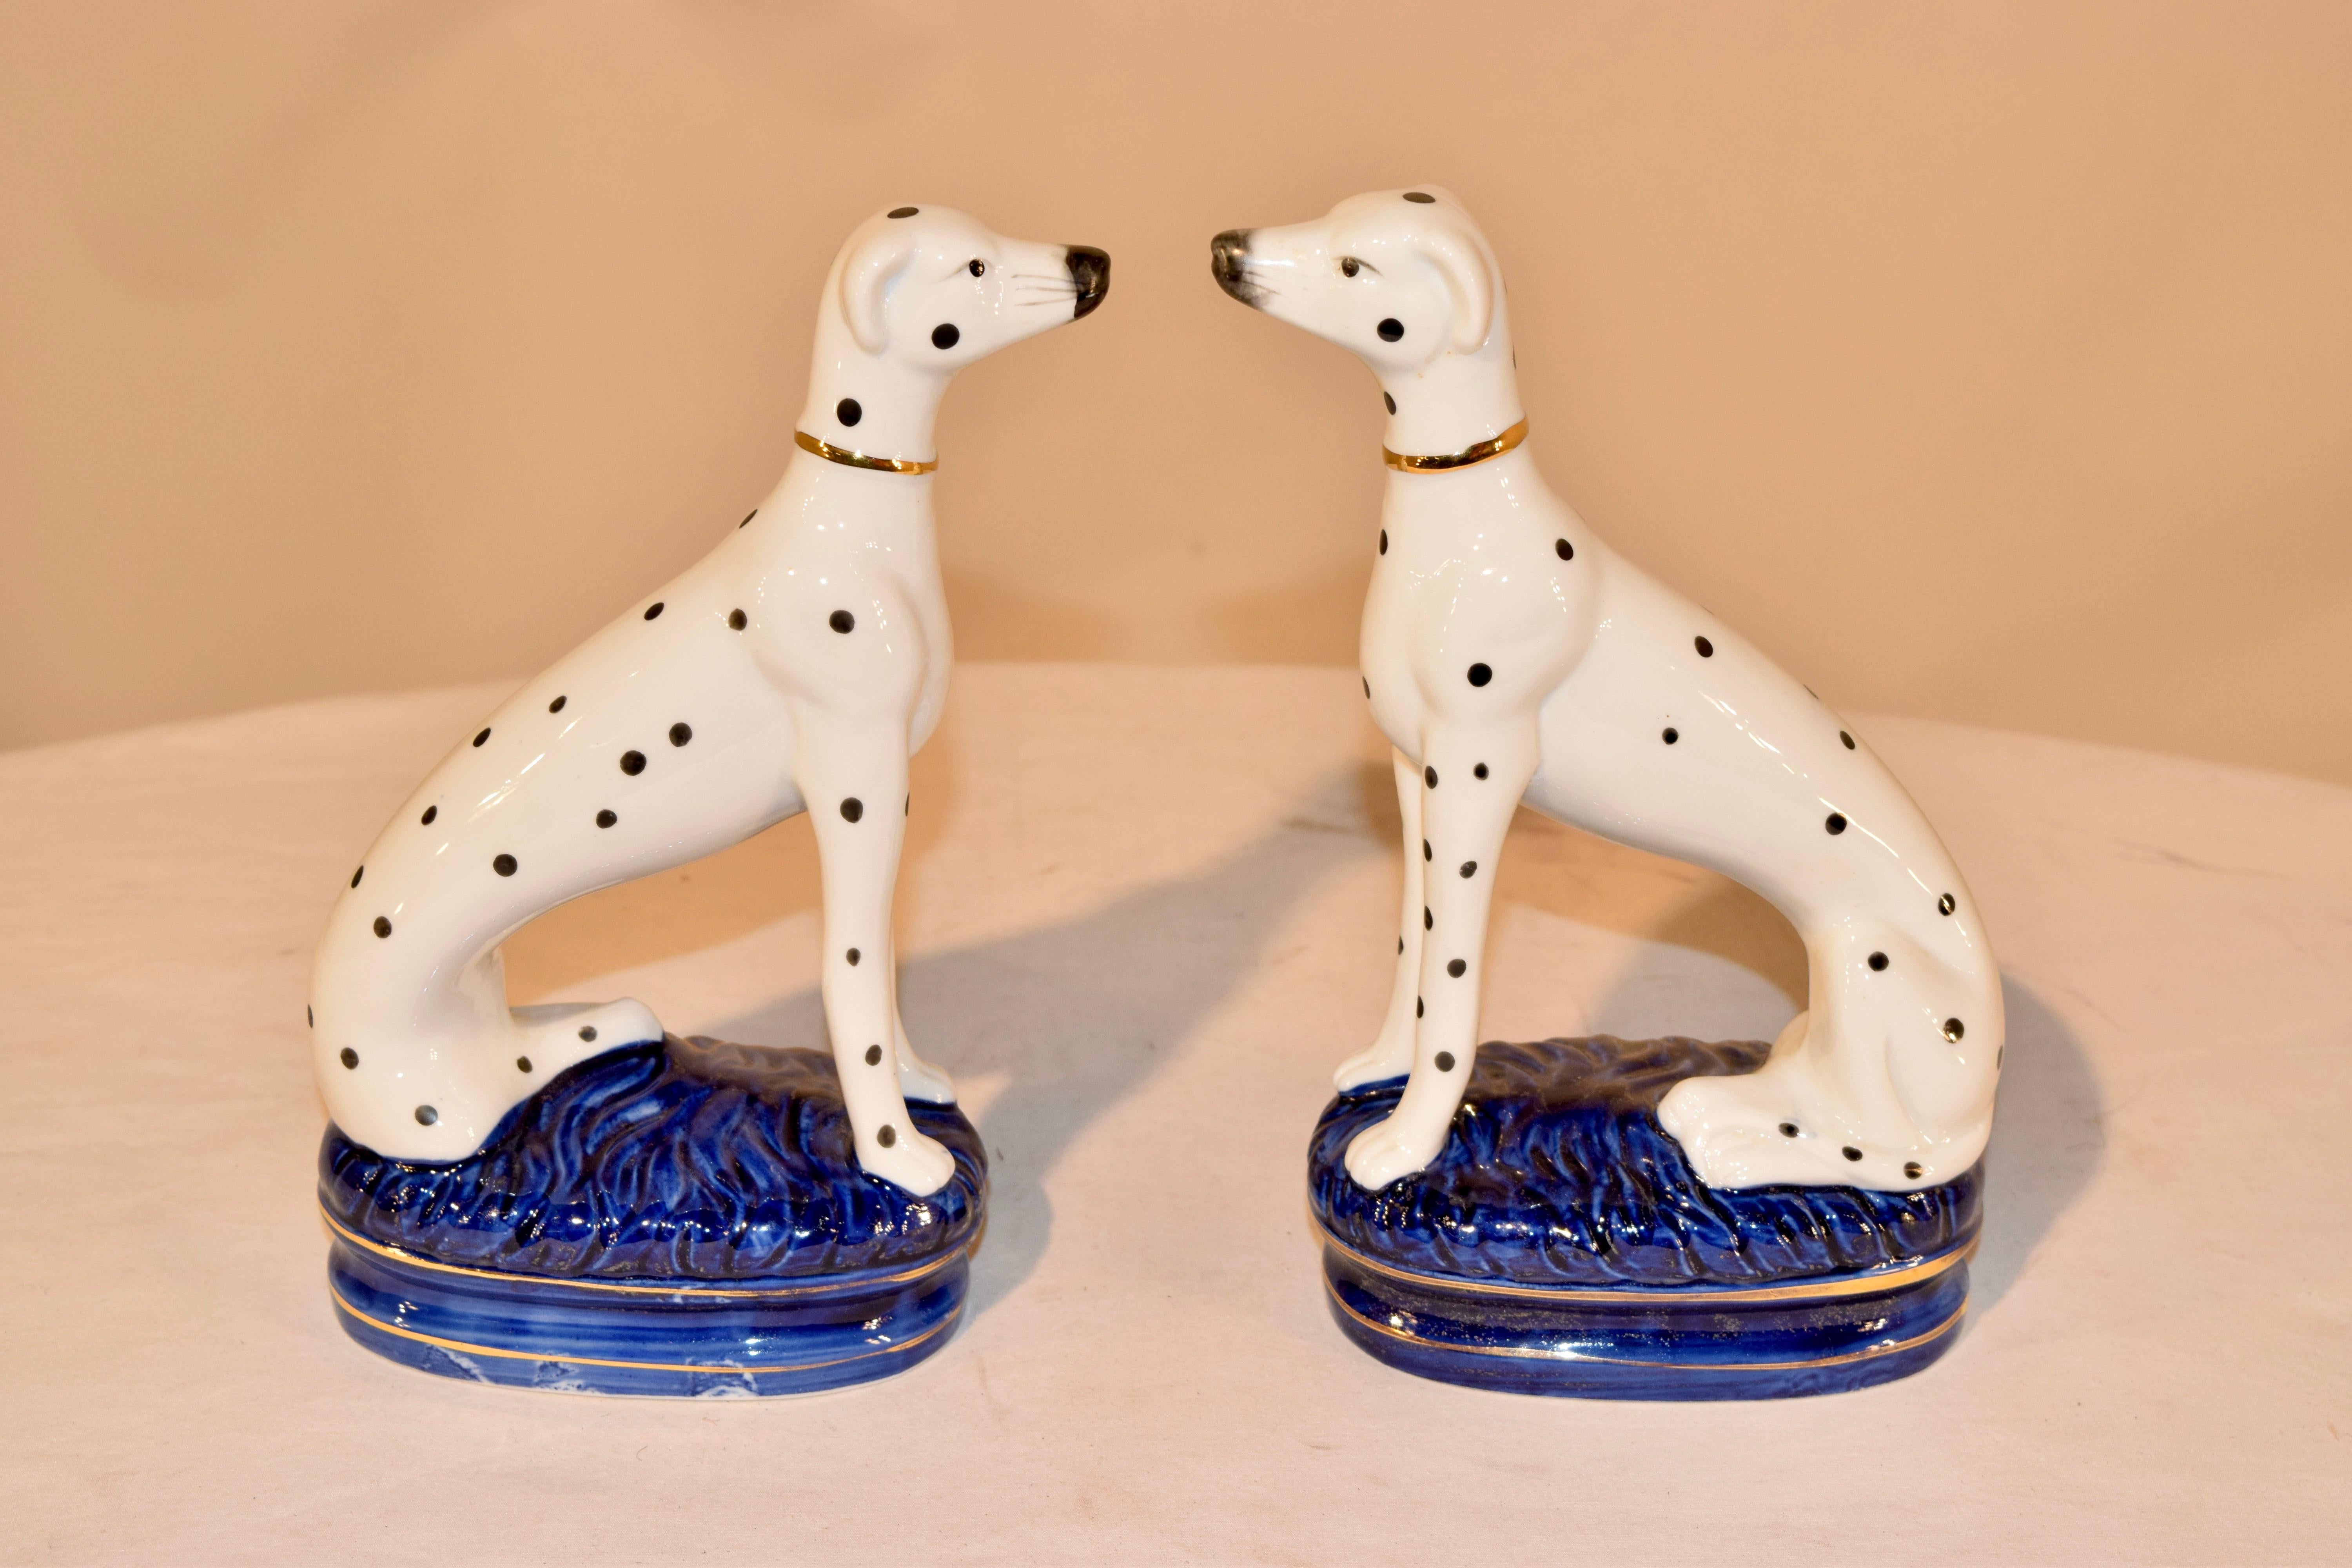 Pair of Staffordshire pottery Dalmatians, circa 1960s. They are a wonderful model and are hand painted in black and white and raised on cobalt blue bases. The dogs have separated front legs.